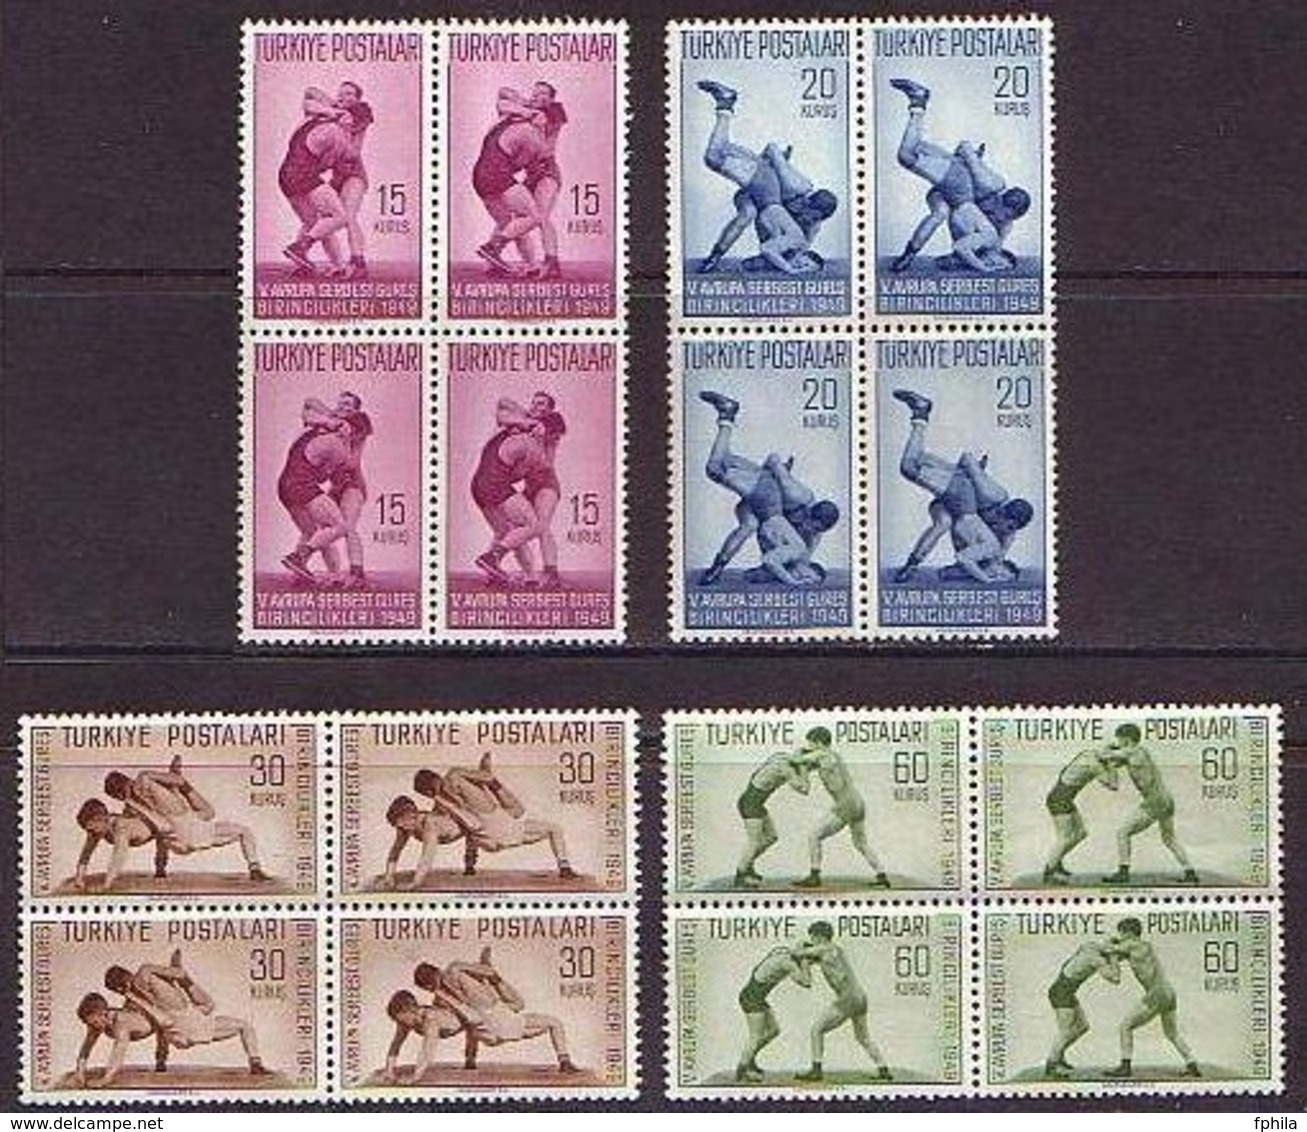 1949 TURKEY THE 5TH EUROPEAN WRESTLING CHAMPIONSHIPS BLOCK OF 4 MNH ** - Lutte